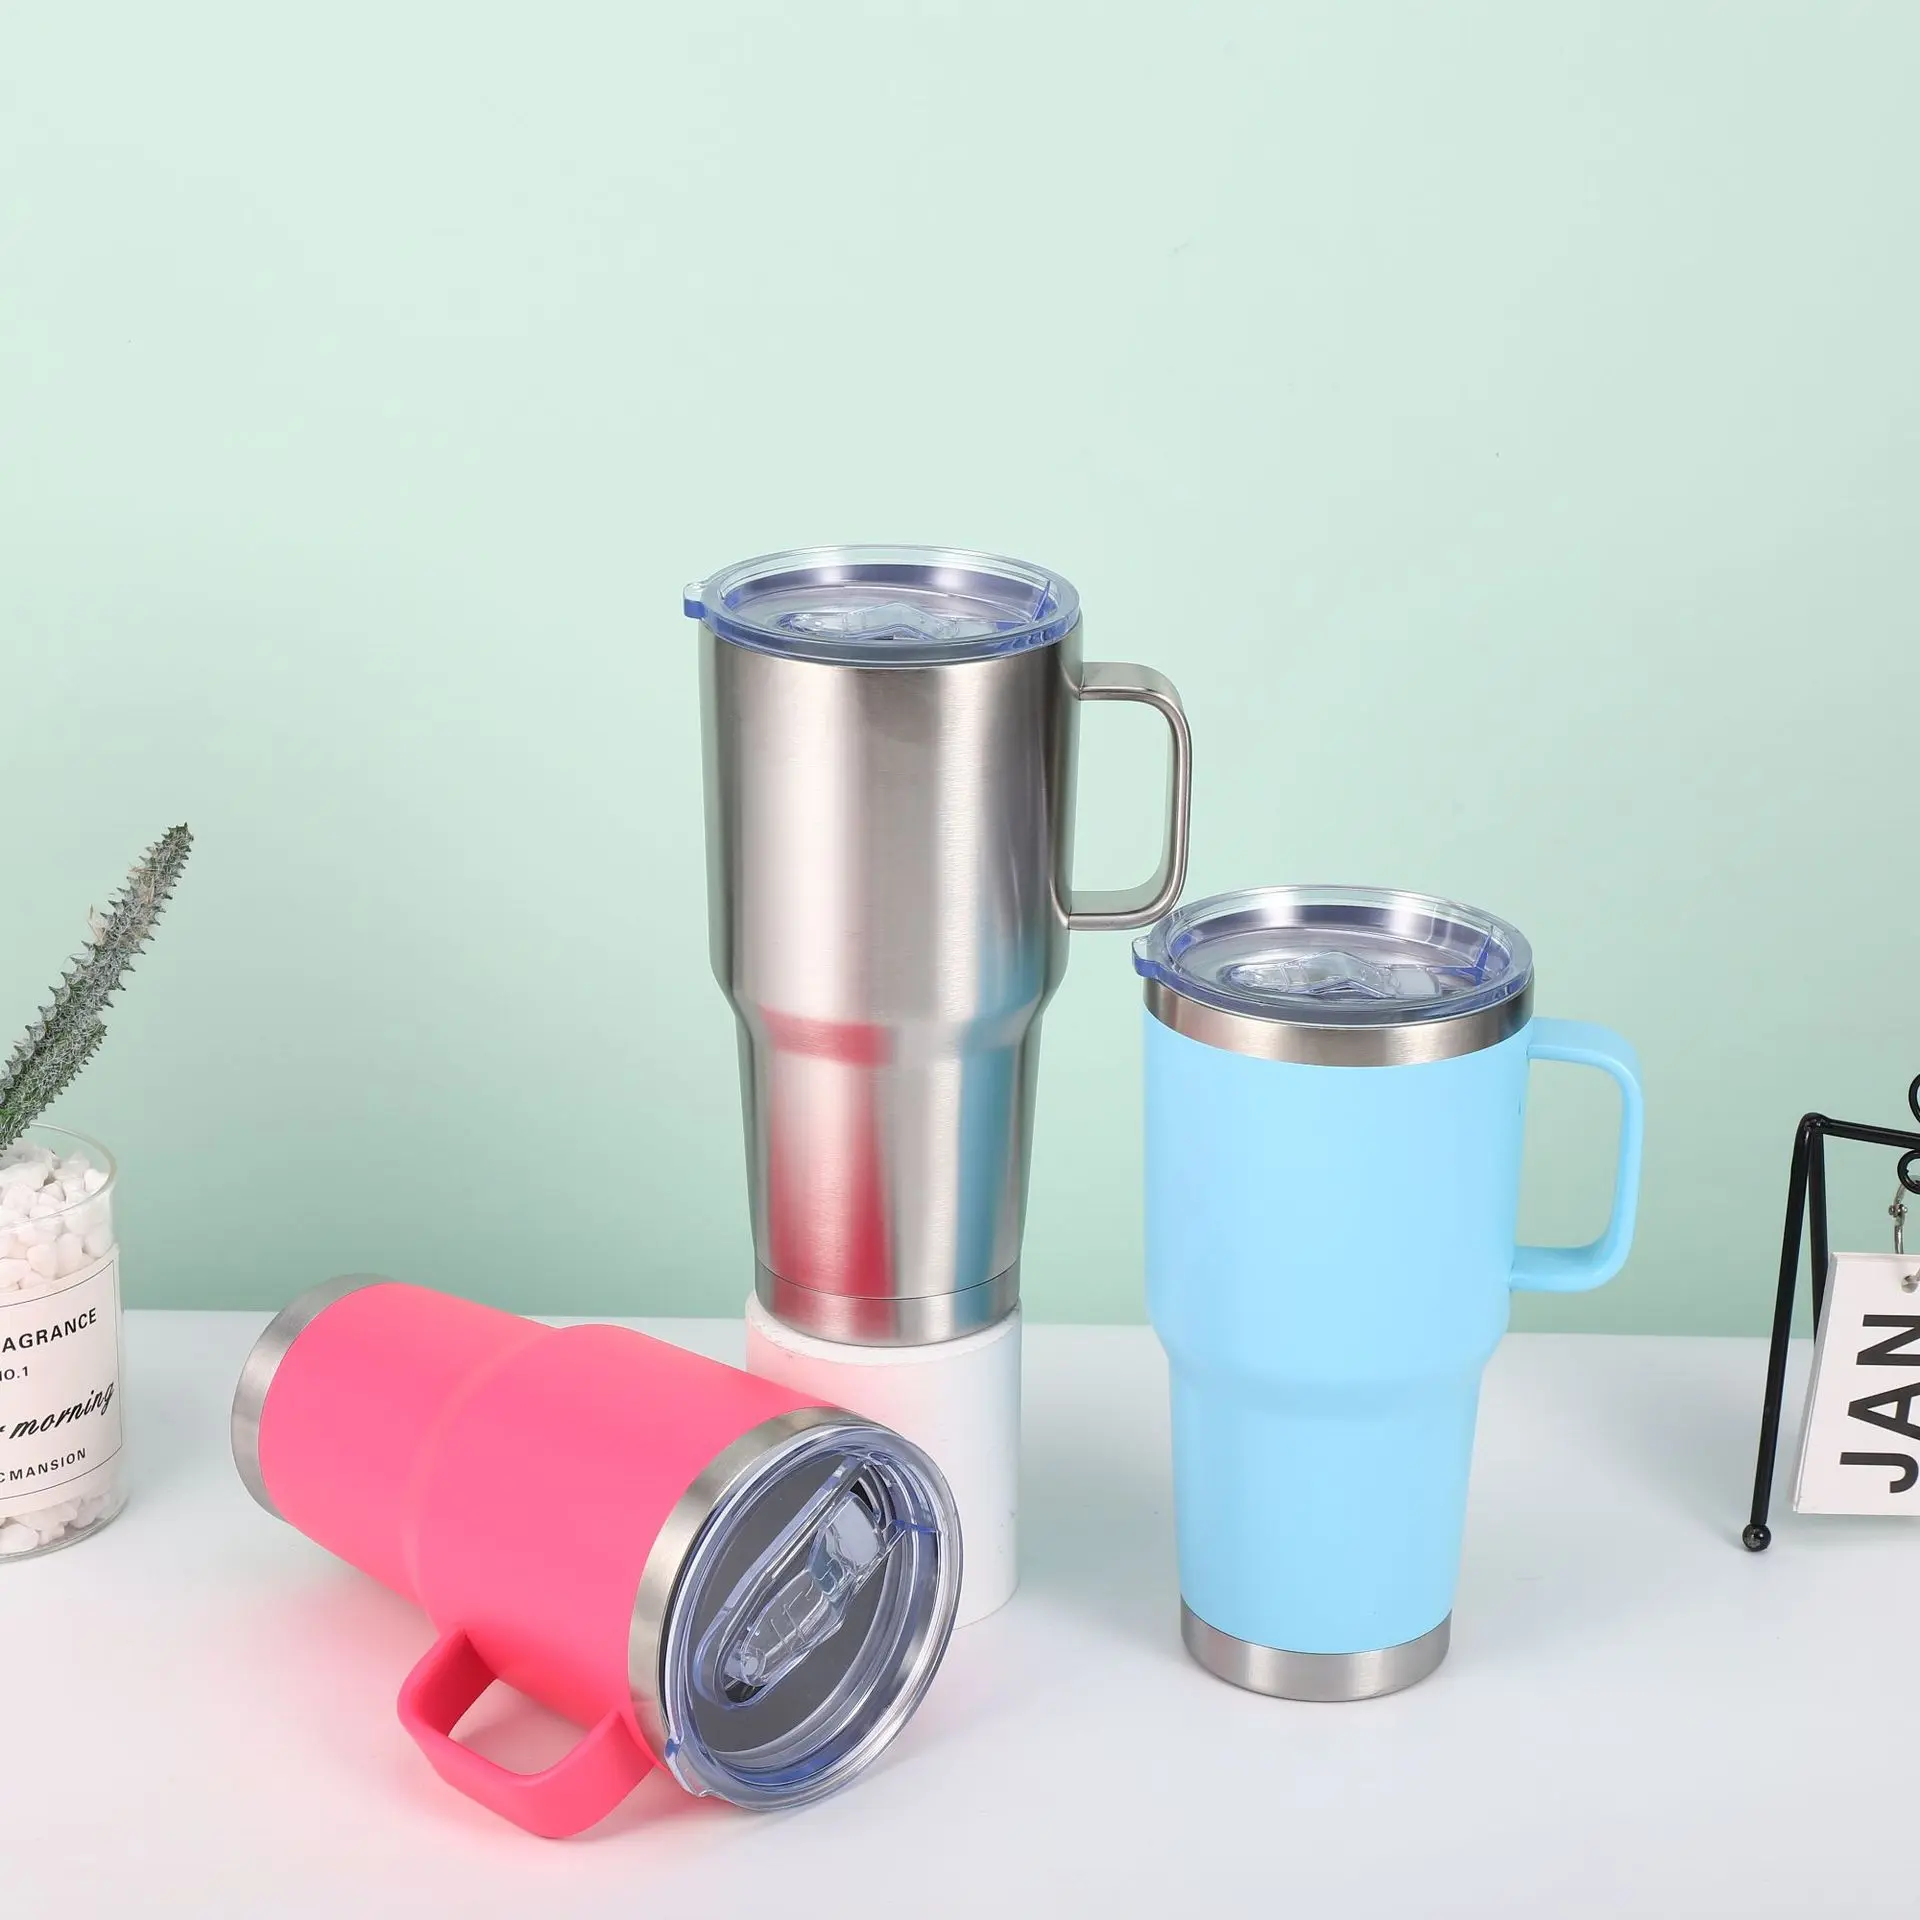 What kind of water bottle should I bring when traveling in spring